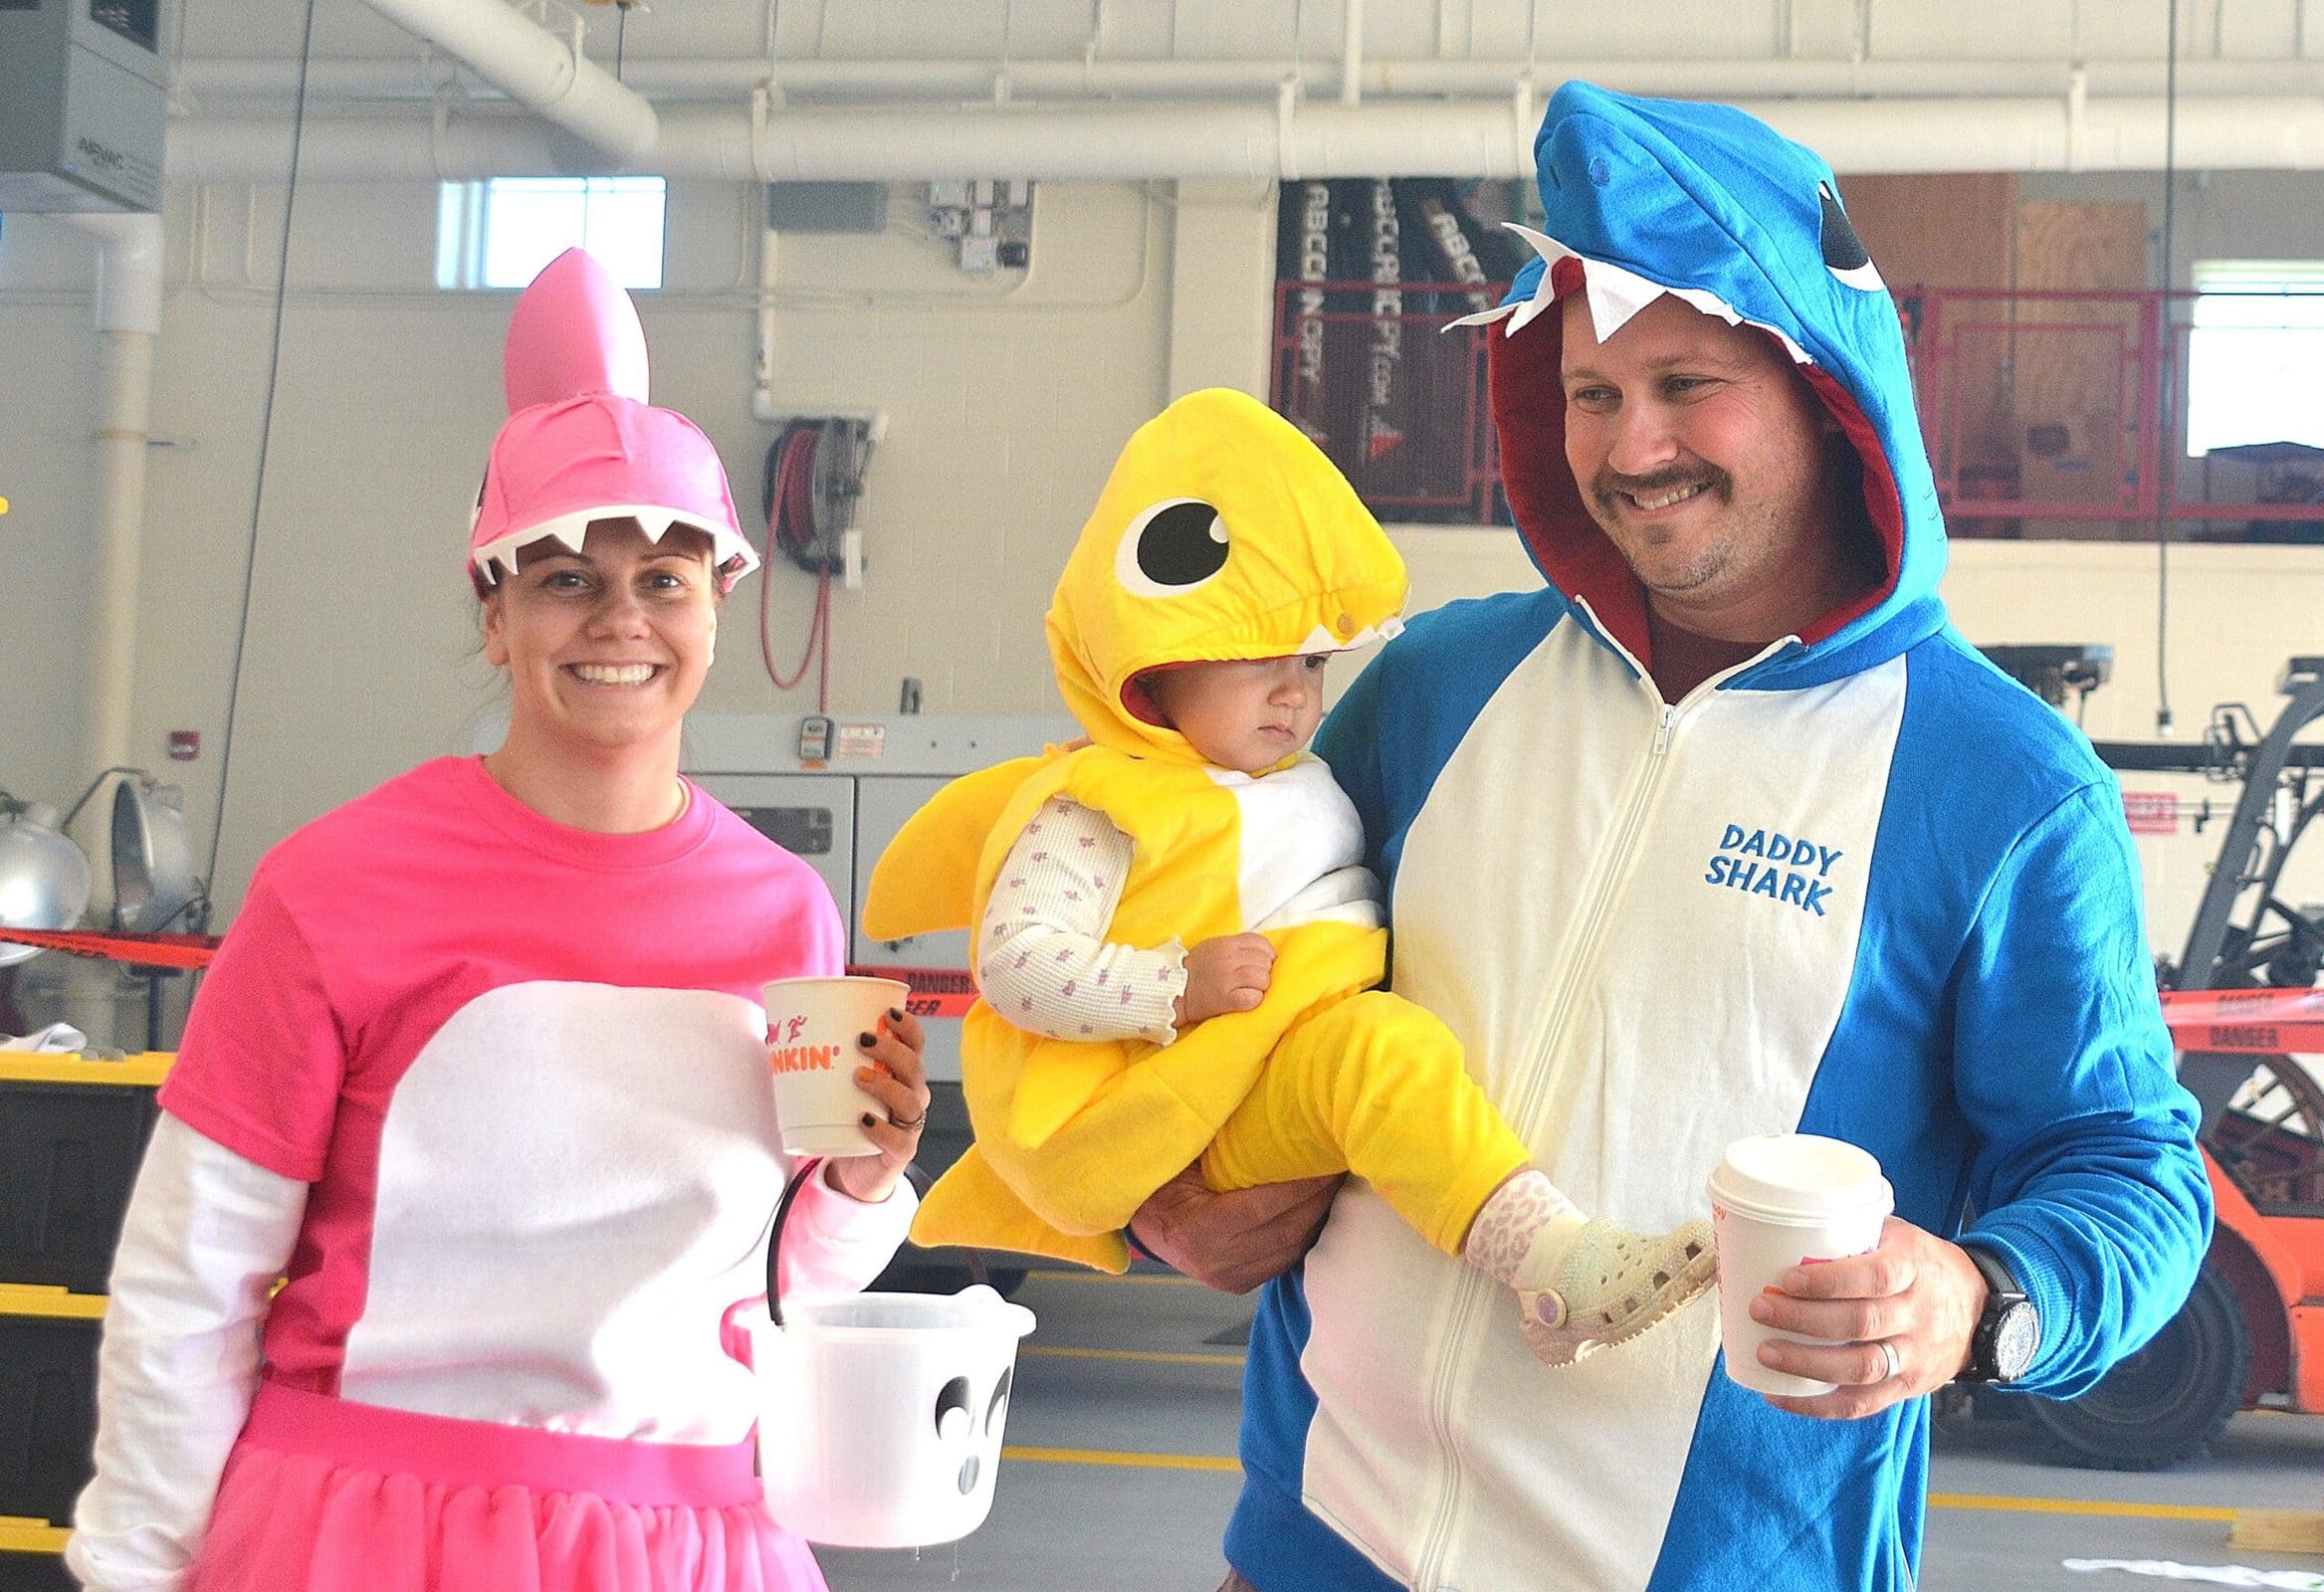 Costumed as sharks, the Kendall family – (l to r) Nekelle, Camryn, 18 months, and Nate – complete the Halloween Parade.